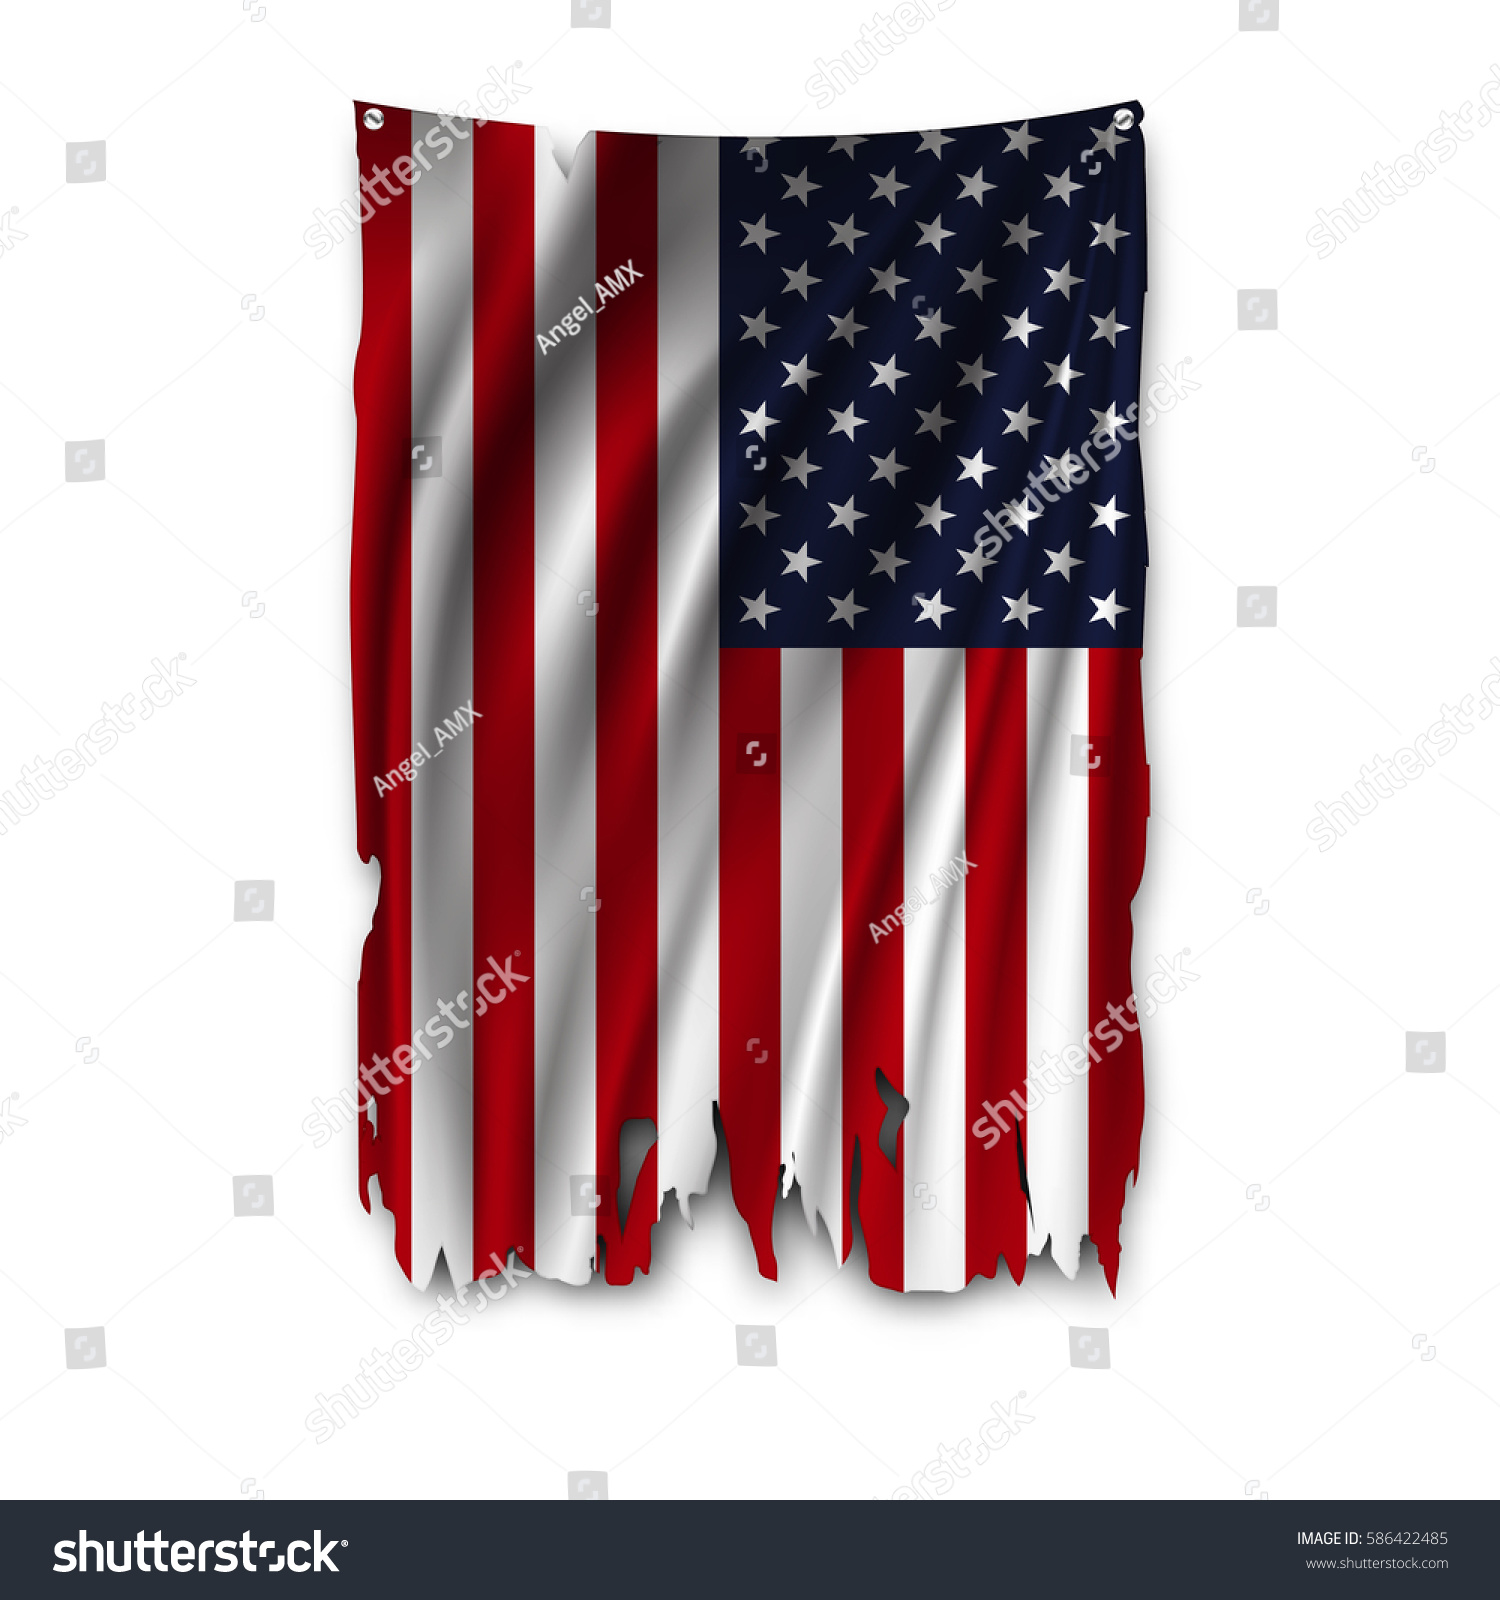 SVG of Torn by the wind national flag of USA. Ragged. The wavy fabric on white background. Realistic vector illustration. svg